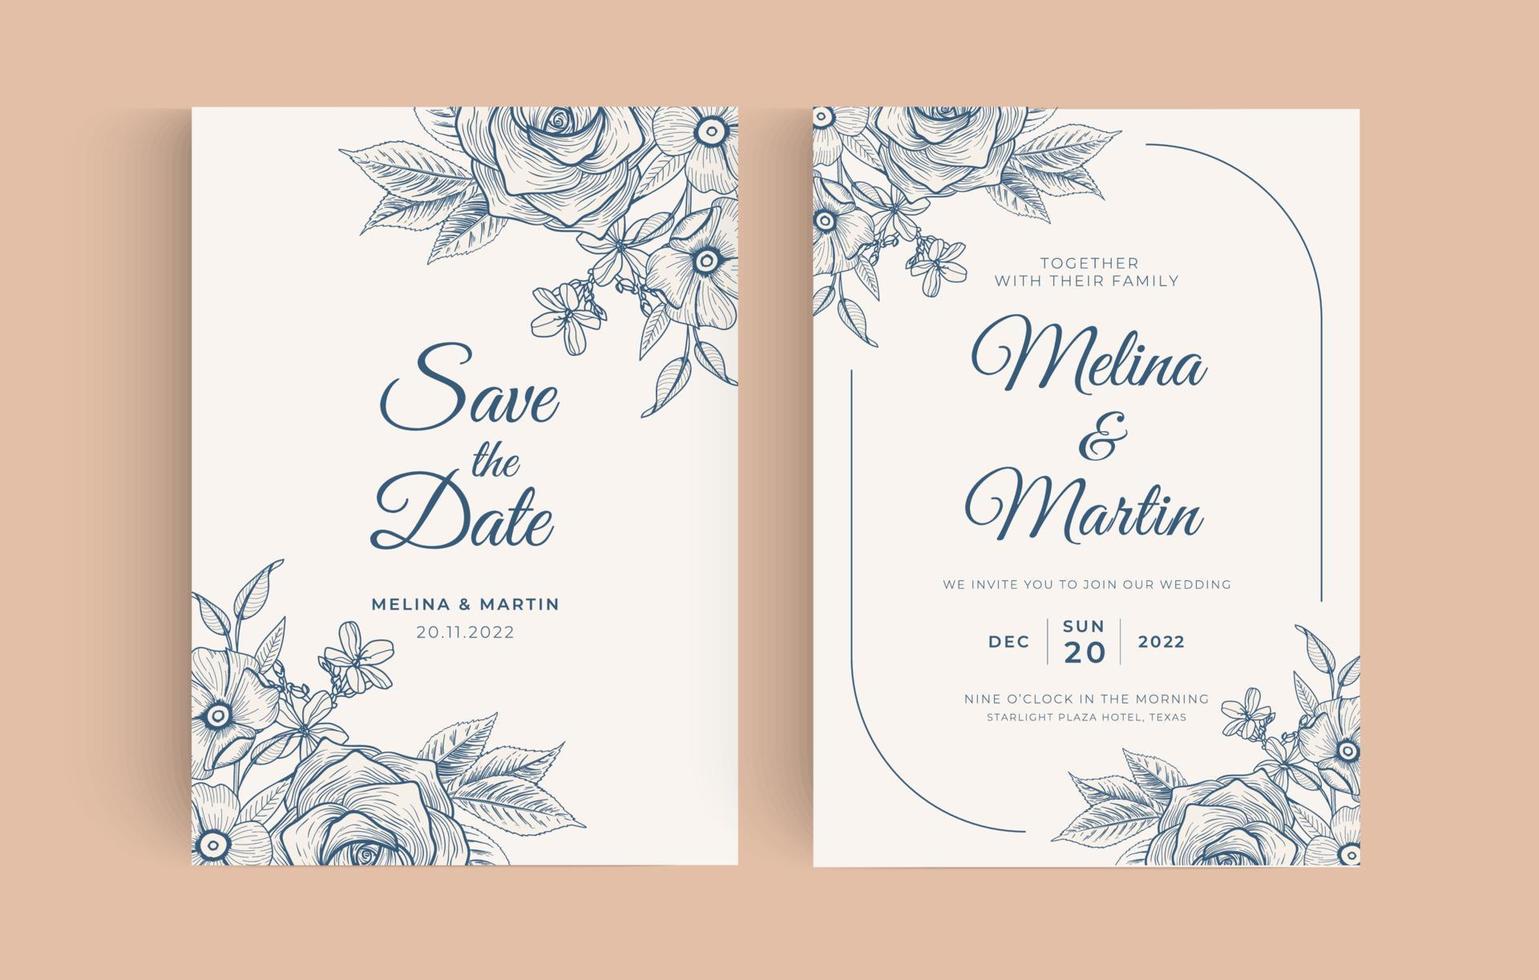 https://static.vecteezy.com/system/resources/previews/008/883/538/non_2x/luxury-wedding-save-the-date-invitation-cards-collection-trendy-cover-graphic-poster-geometric-floral-brochure-design-template-free-vector.jpg